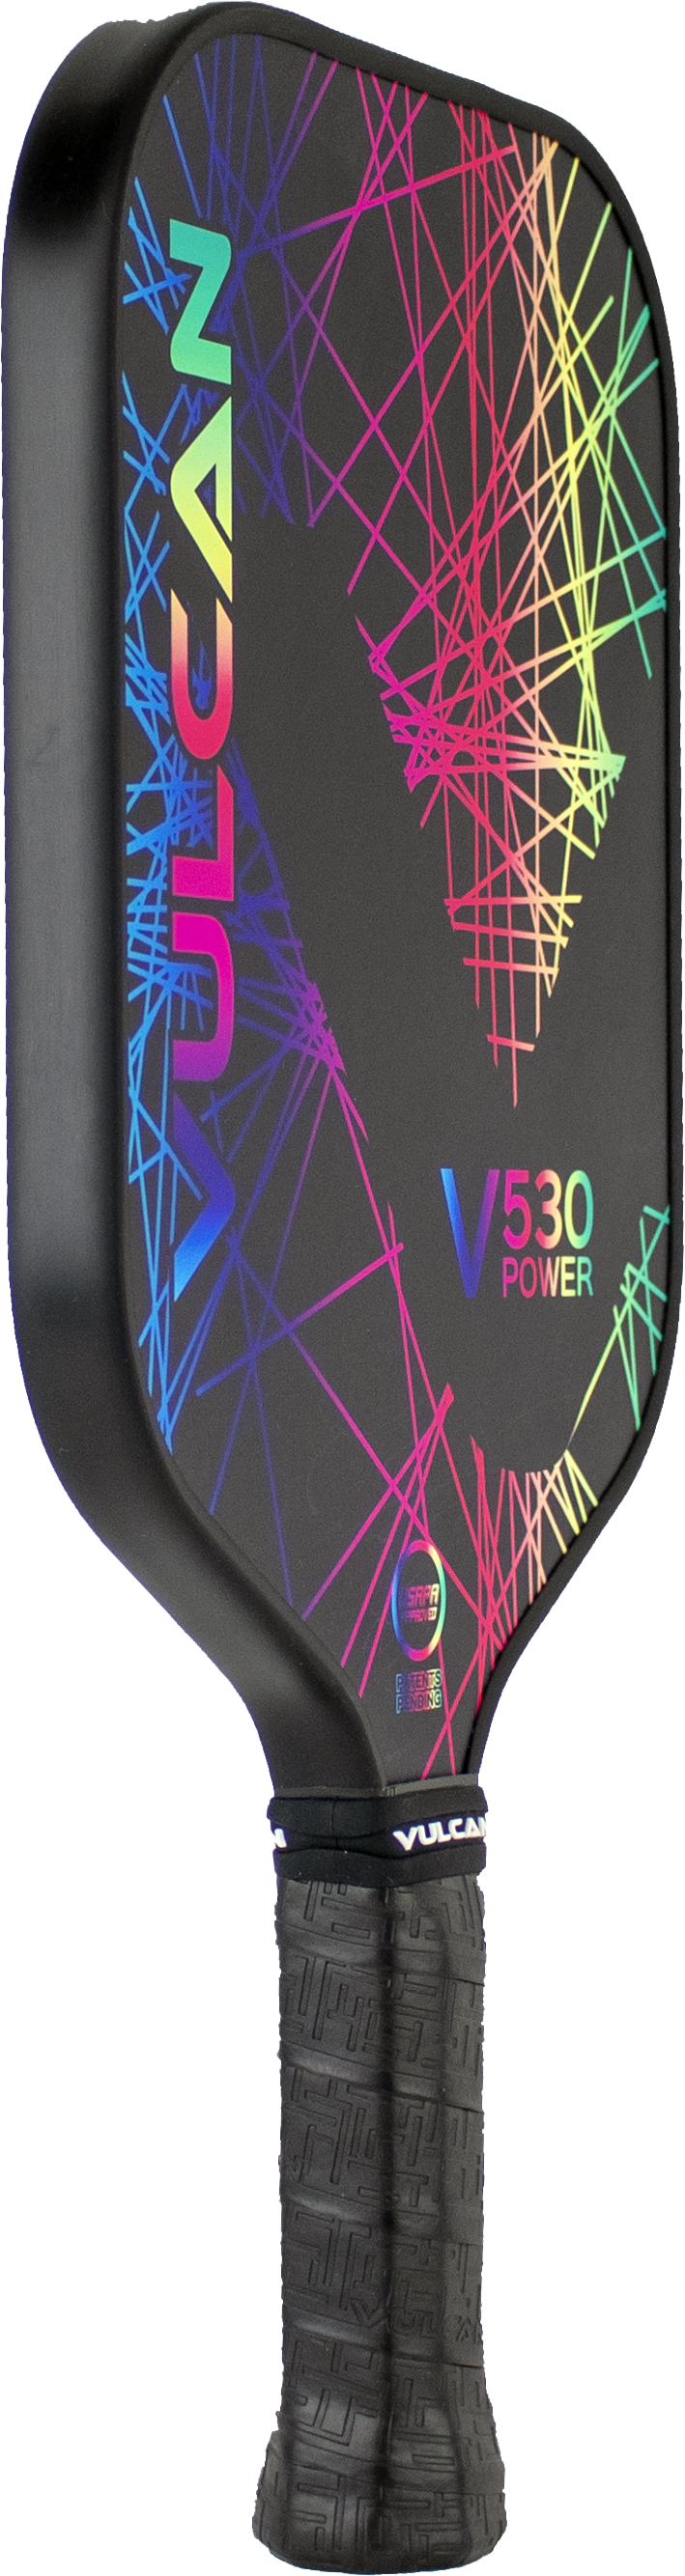 The Vulcan V530 Power Pickleball Paddle by Vulcan is shown on a white background.